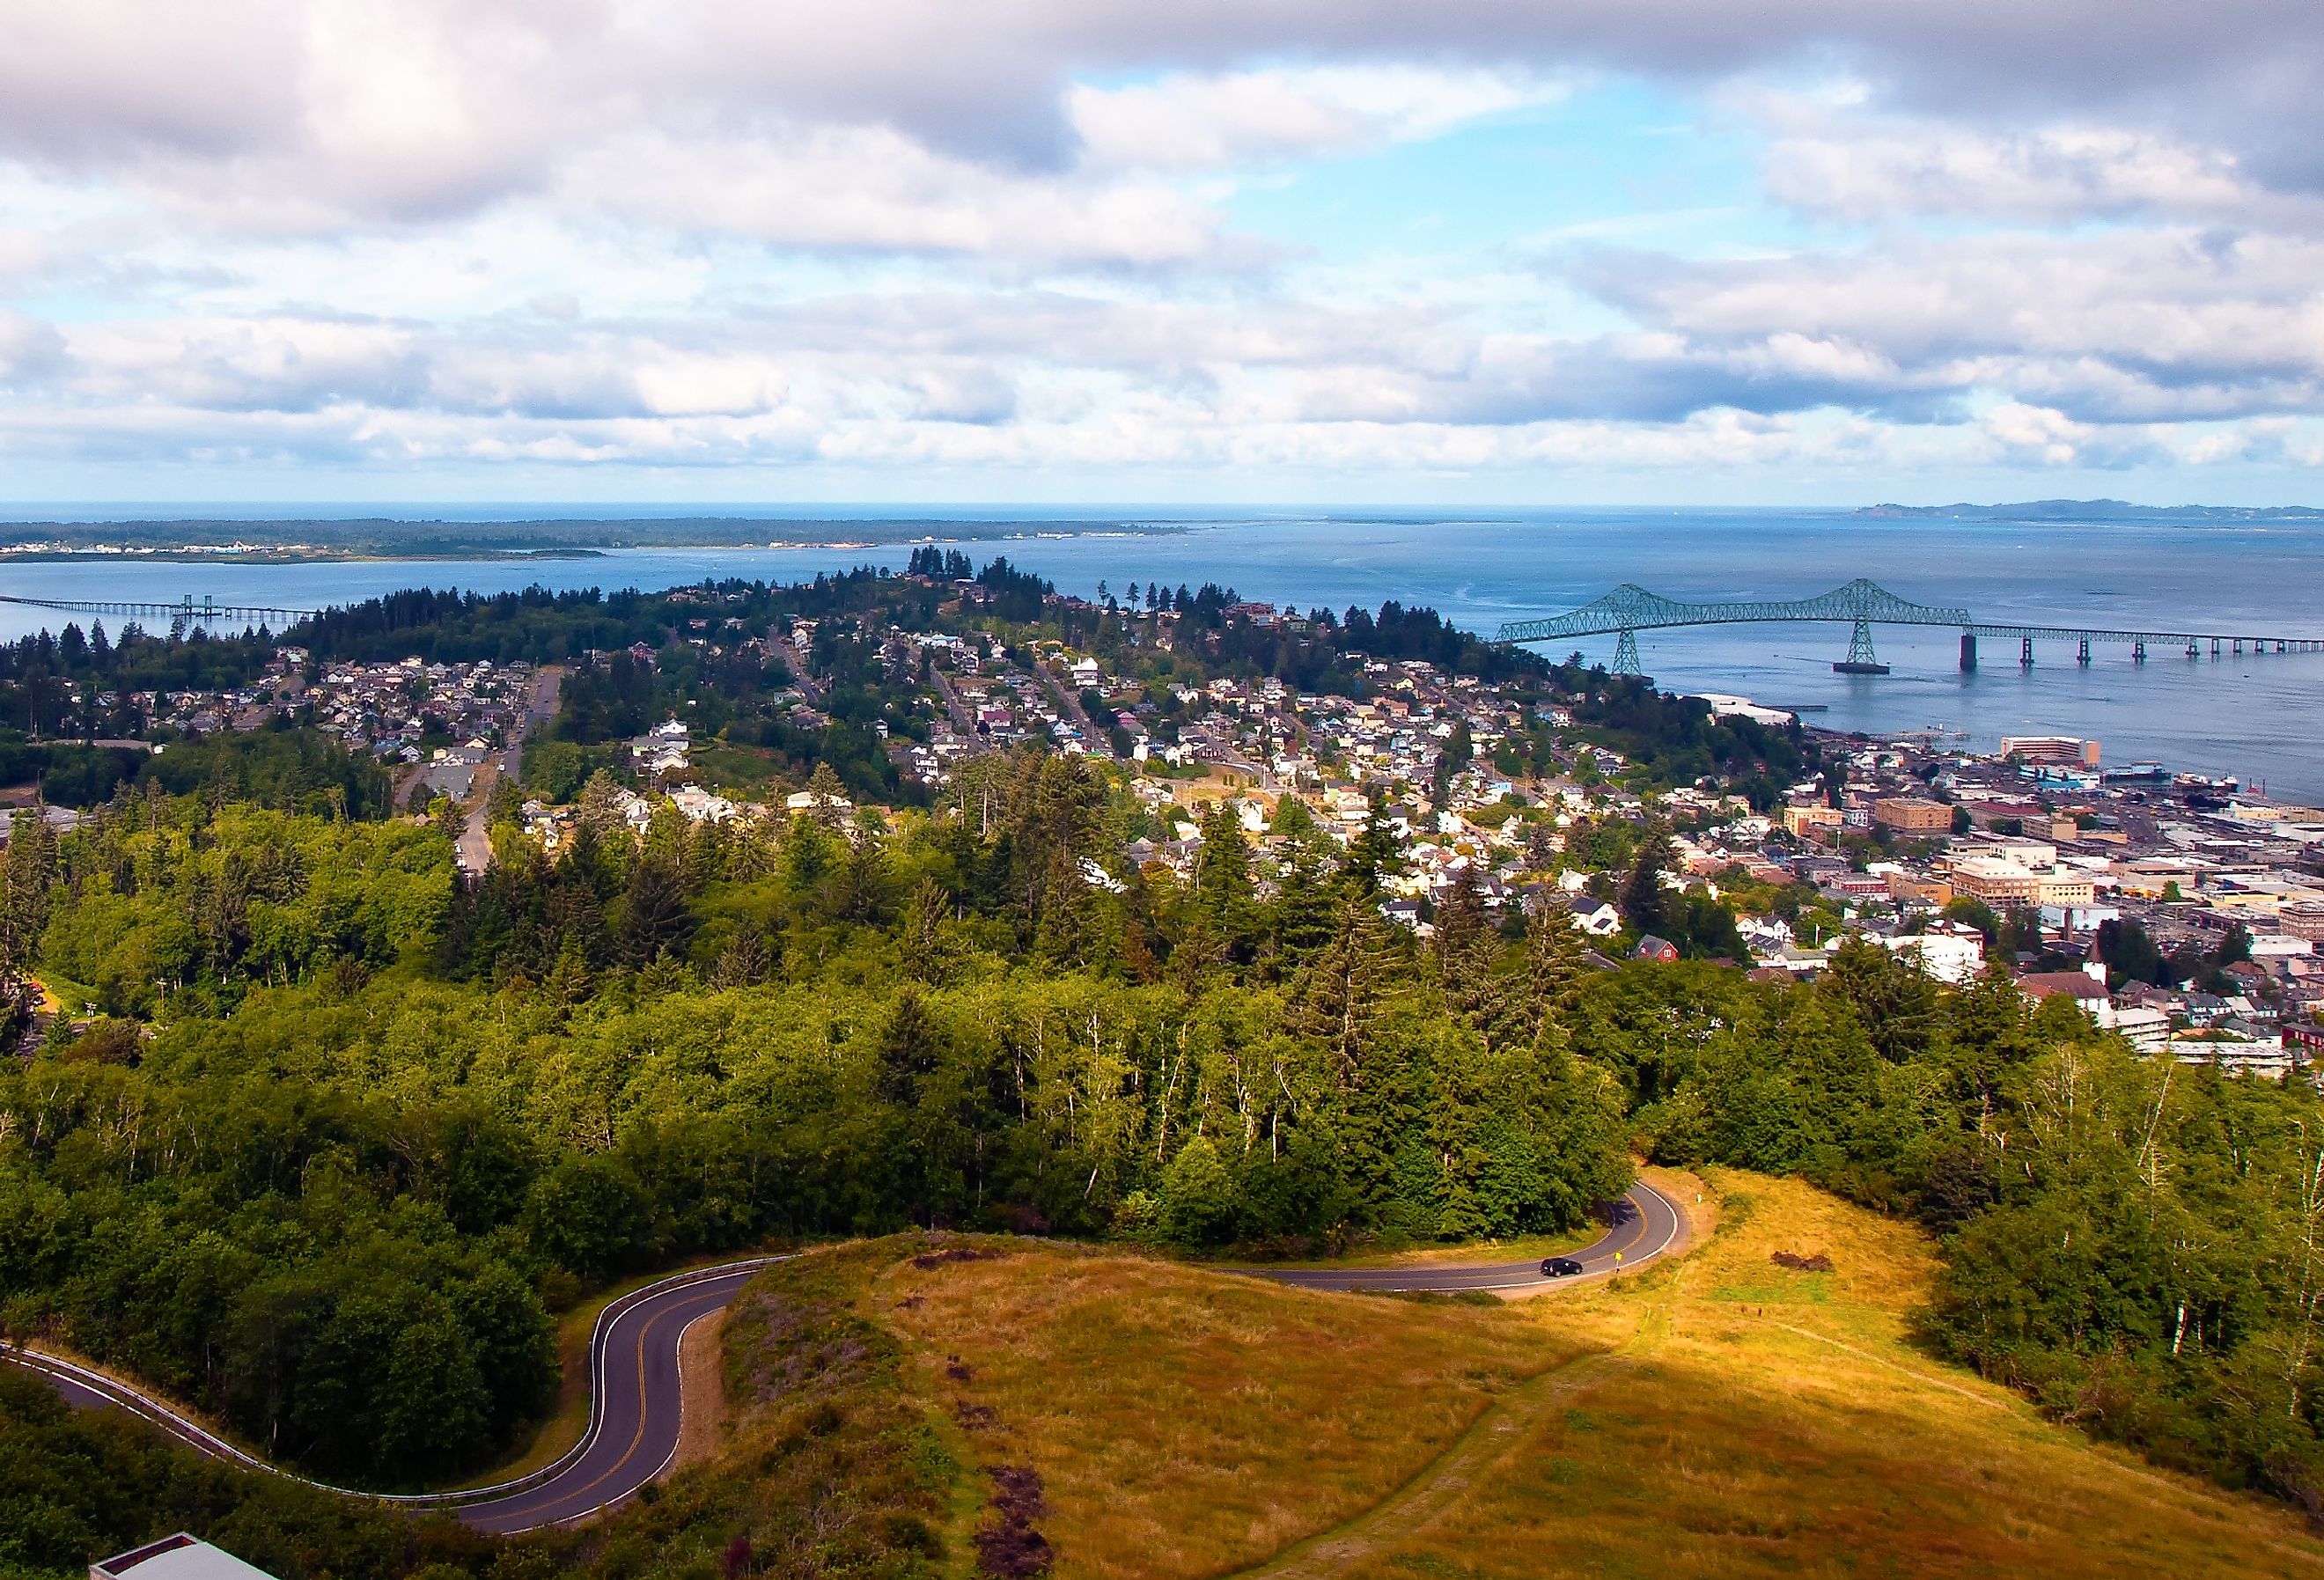 View overlooking Astoria, Oregon and the Columbia River.